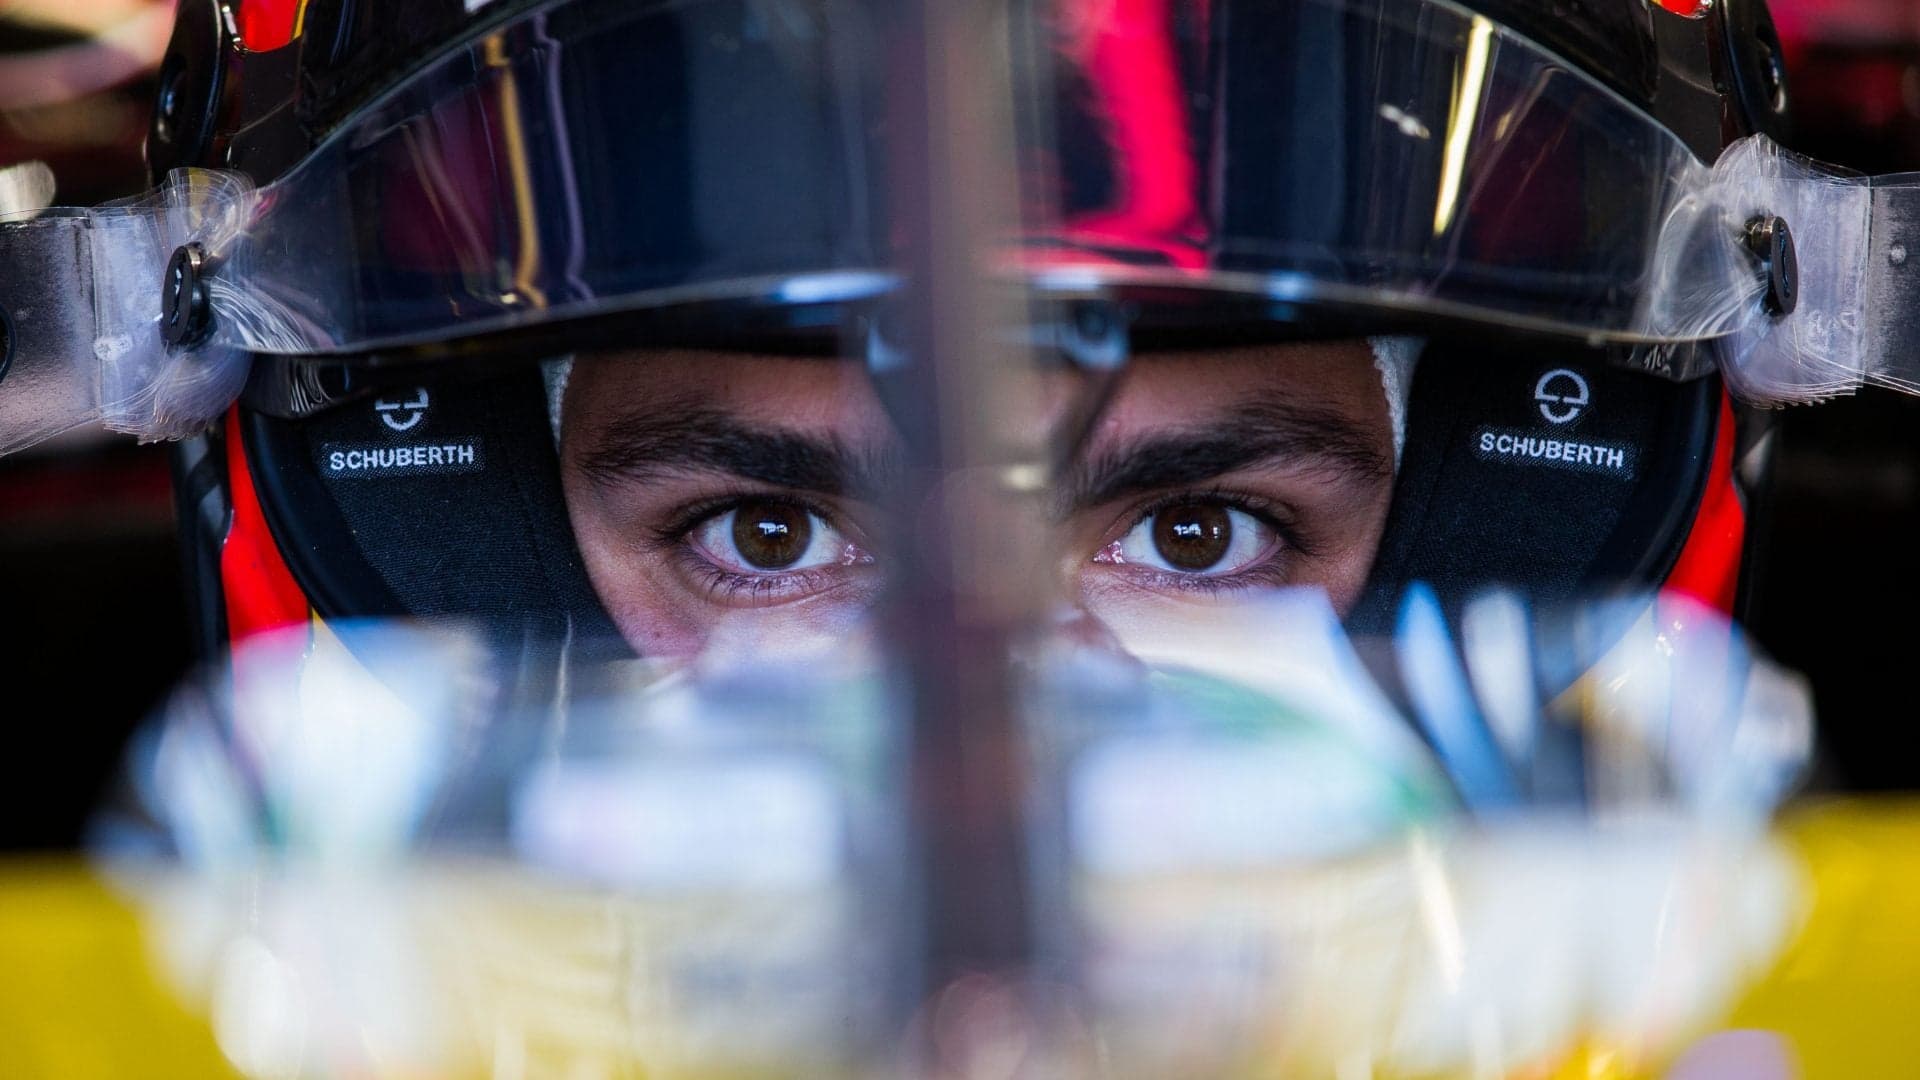 Modern Formula 1 Car’s Braking Forces So Brutal It’ll Extract Tears From Your Eyes, Report Says